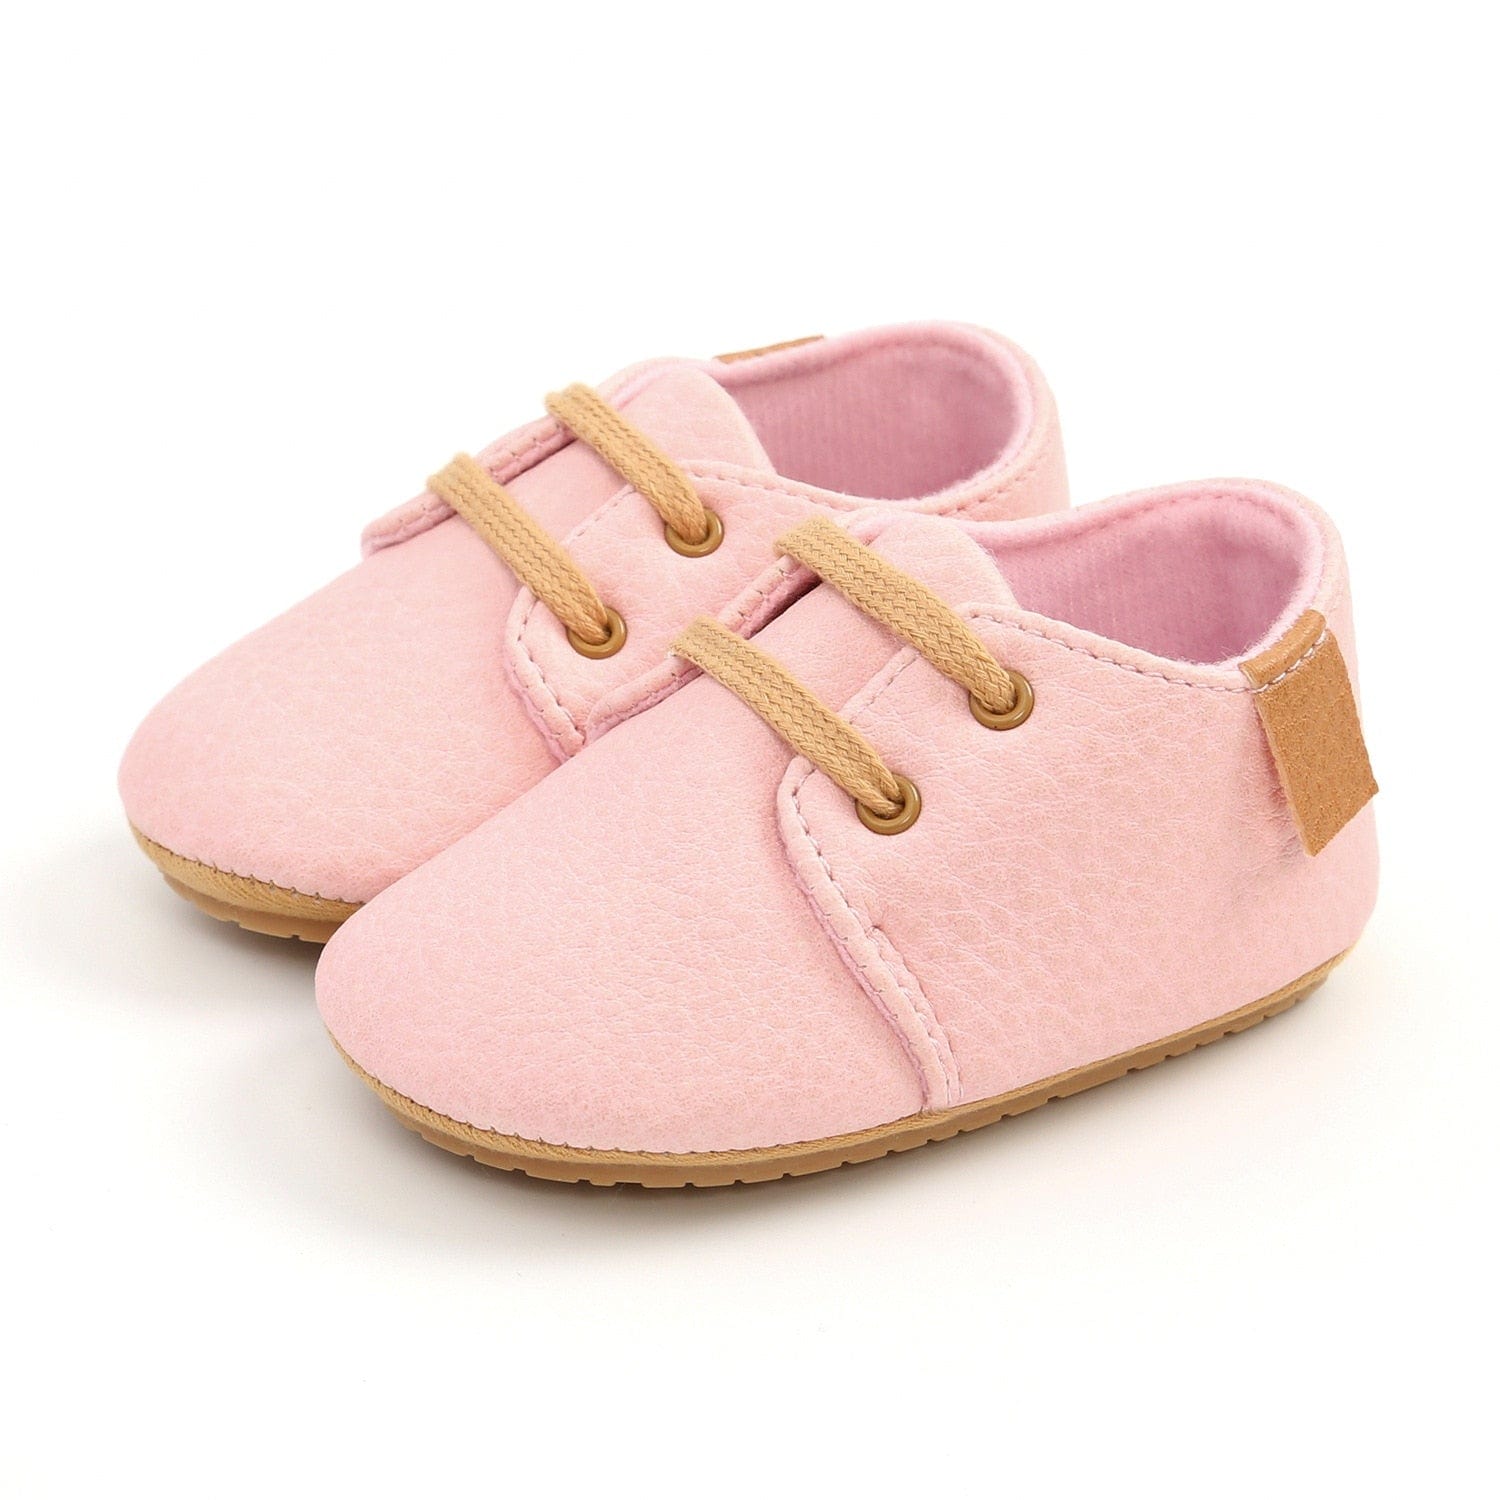 Proactive Baby NewBaby Retro Leather Baby Shoes With Rubber Sole Best First Walkers For Newborn/Infant